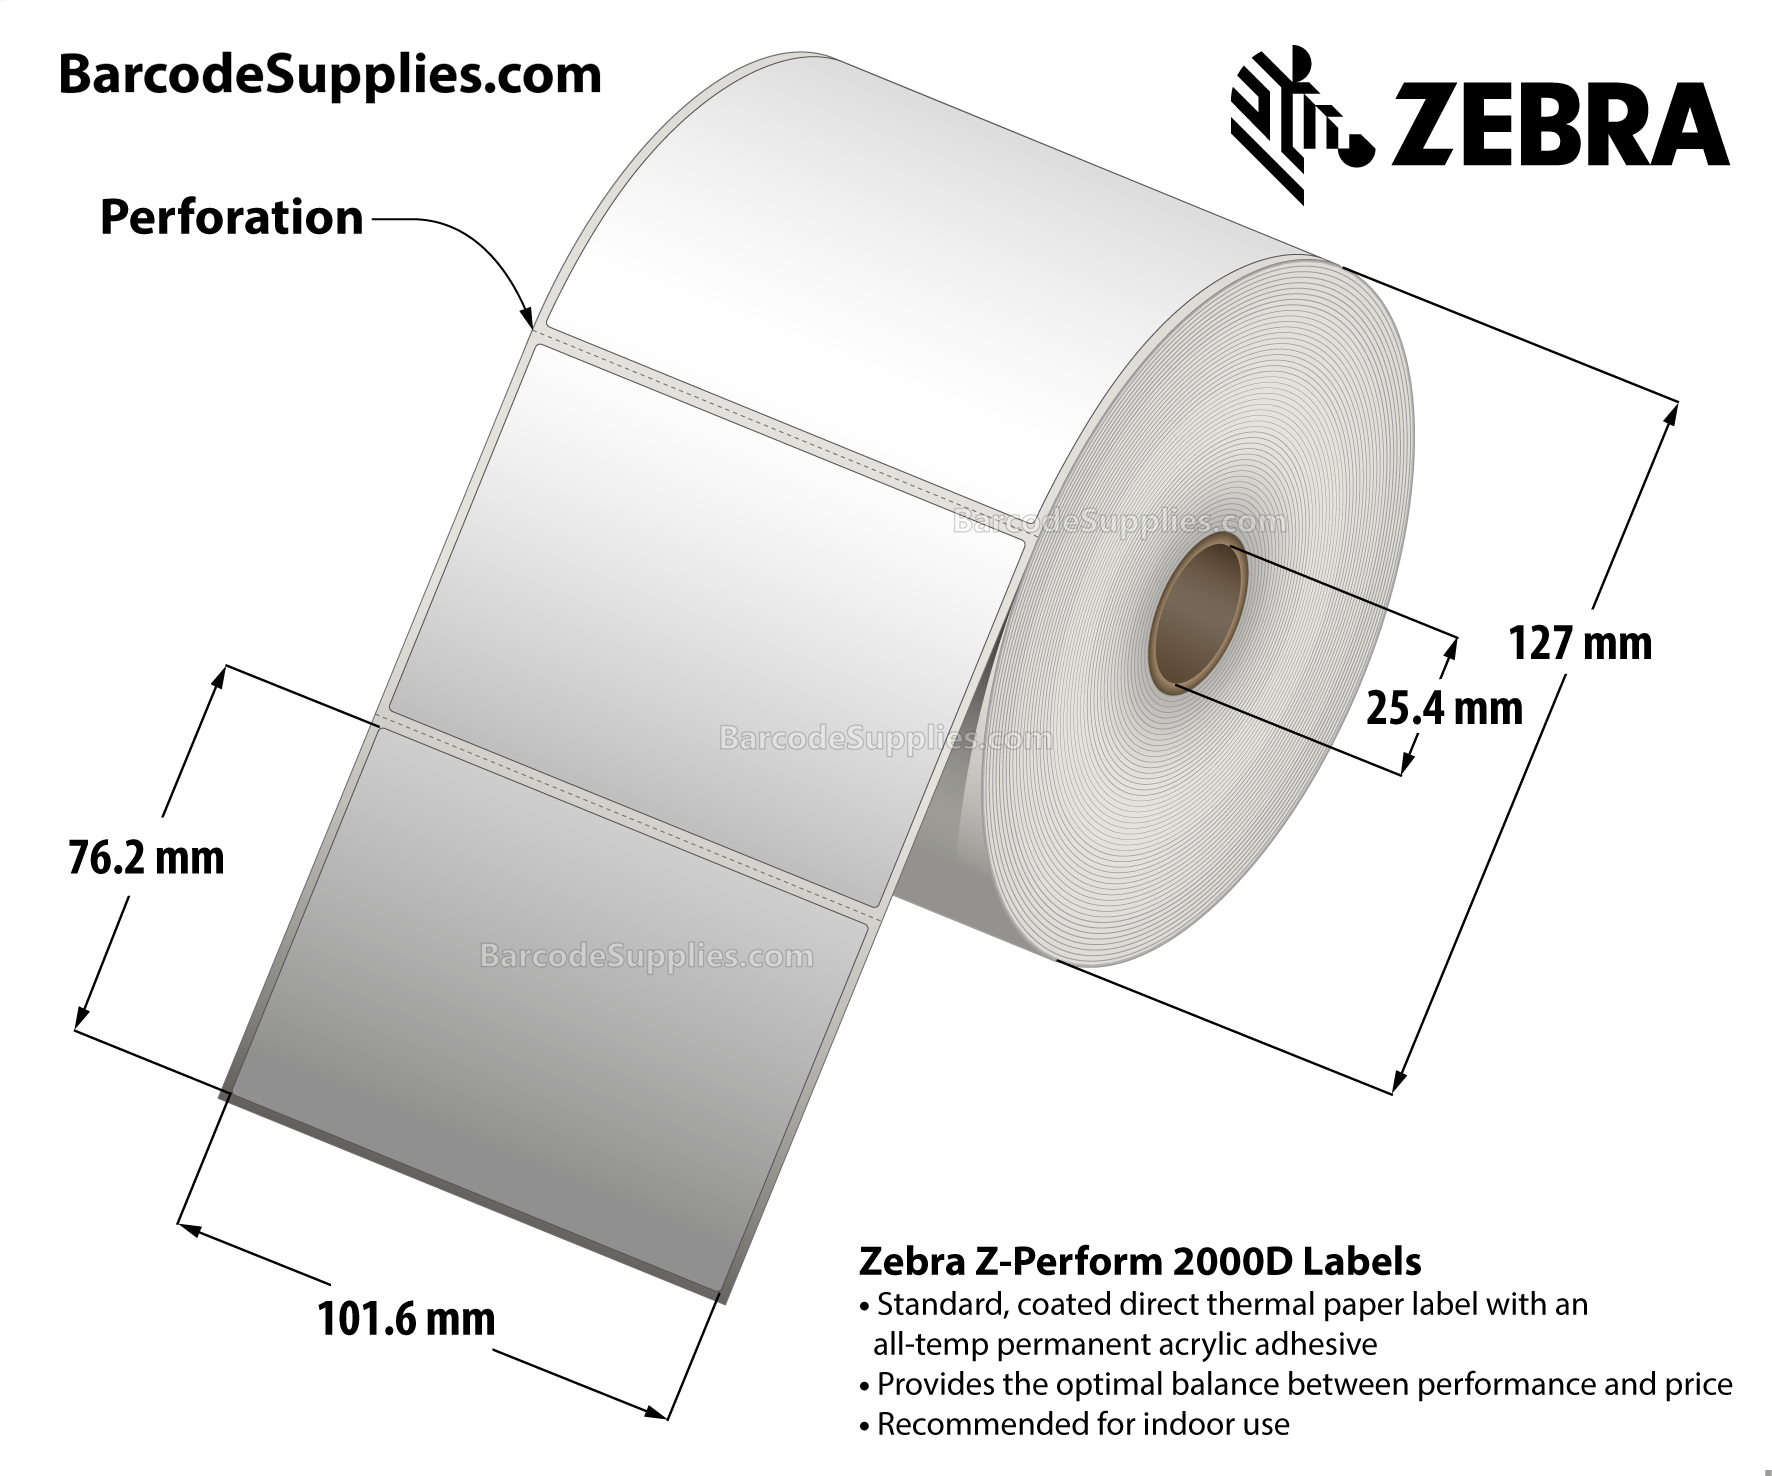 4 x 3 Direct Thermal White Z-Perform 2000D Labels With All-Temp Adhesive - Perforated - 840 Labels Per Roll - Carton Of 6 Rolls - 5040 Labels Total - MPN: 10010032